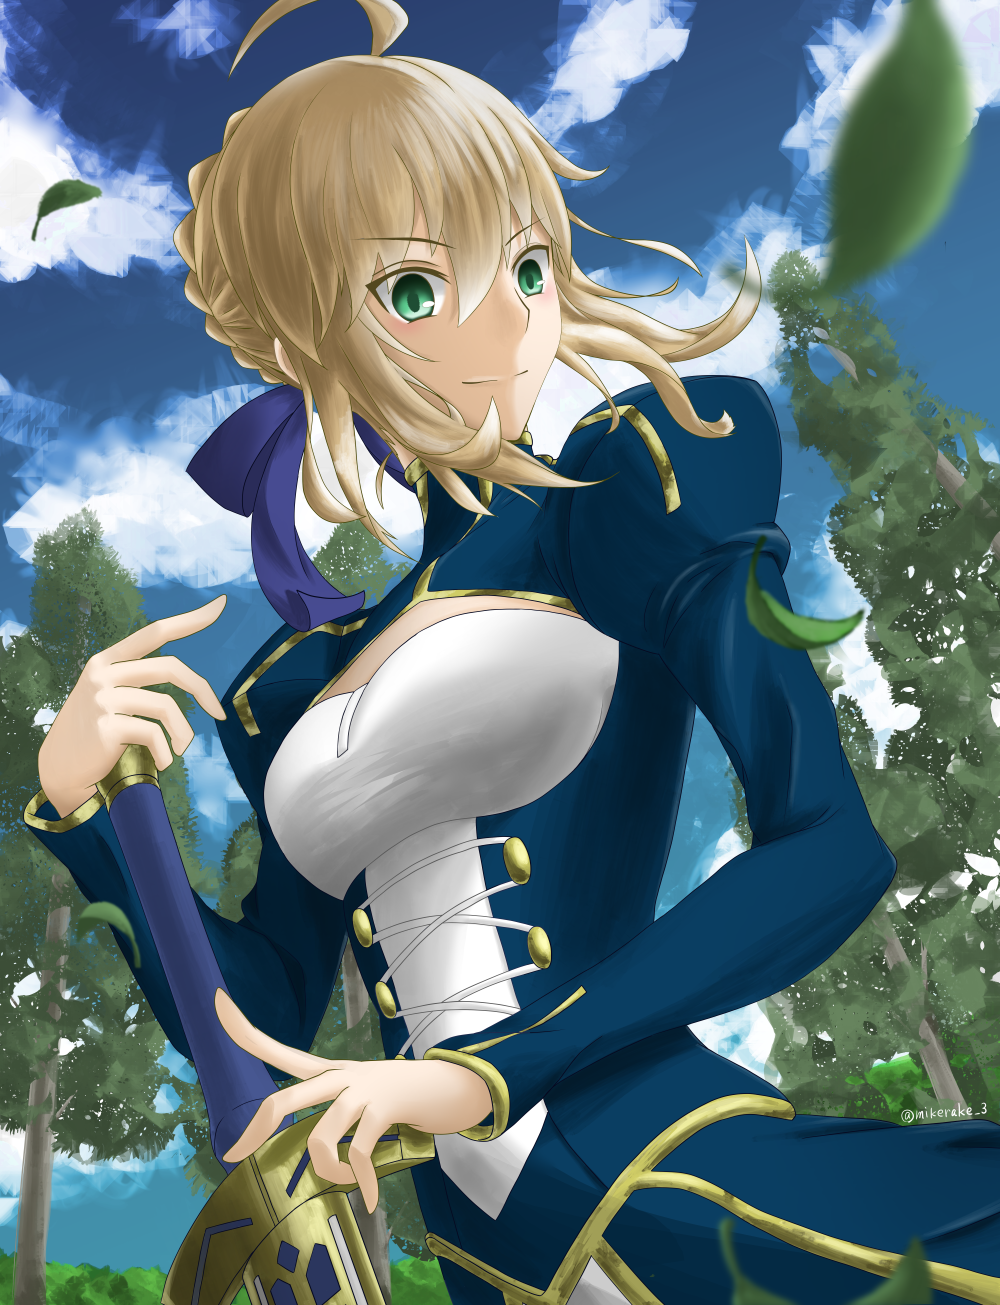 Anime 1000x1305 anime anime girls Fate series Fate/Stay Night Excalibur (Fate series) Saber ahoge blonde solo artwork digital art fan art portrait display looking at viewer smiling sky clouds leaves trees sword weapon